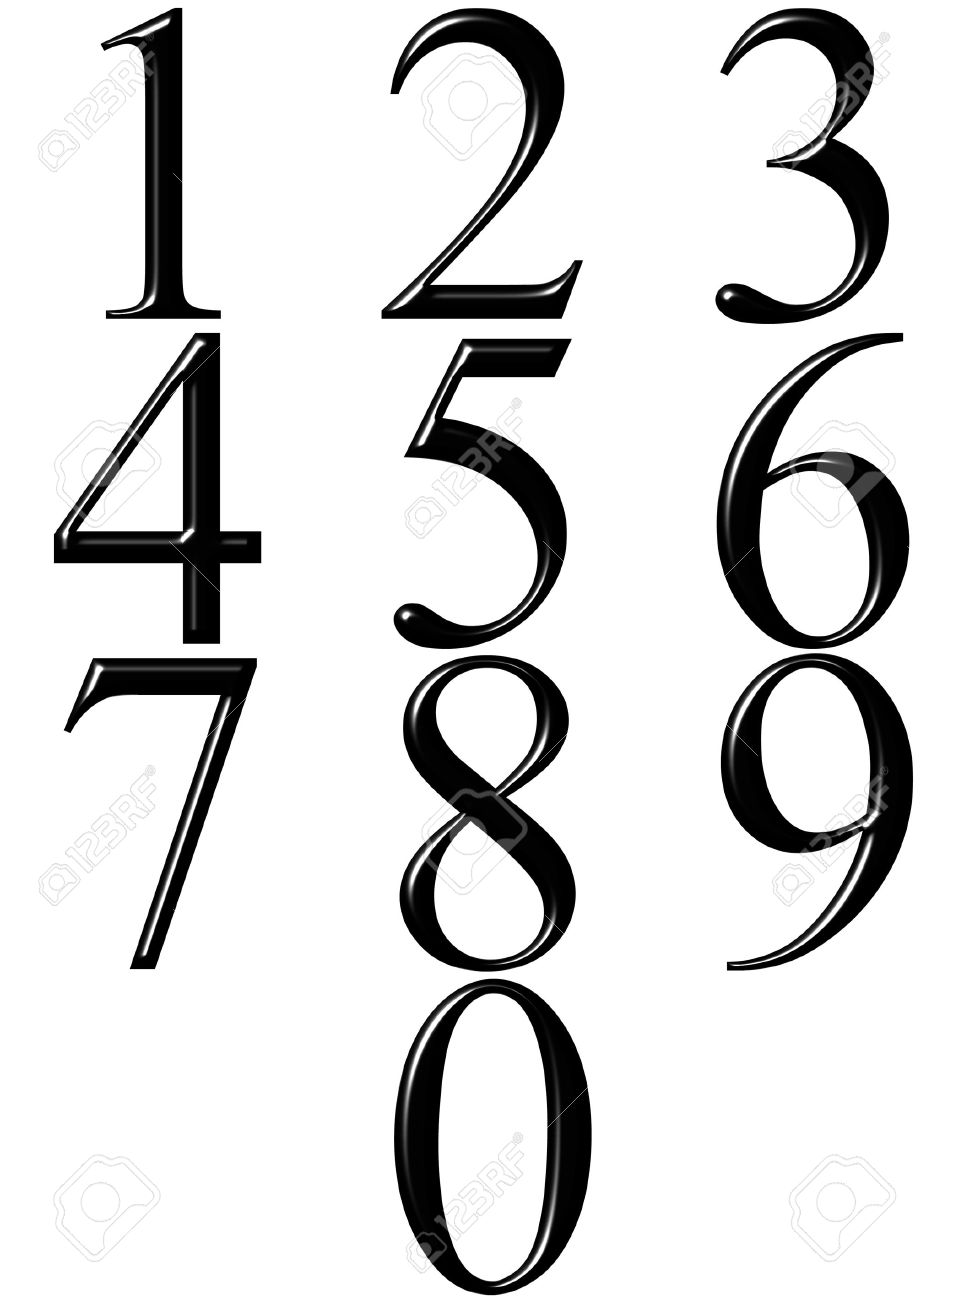 Numbers clipart black and white